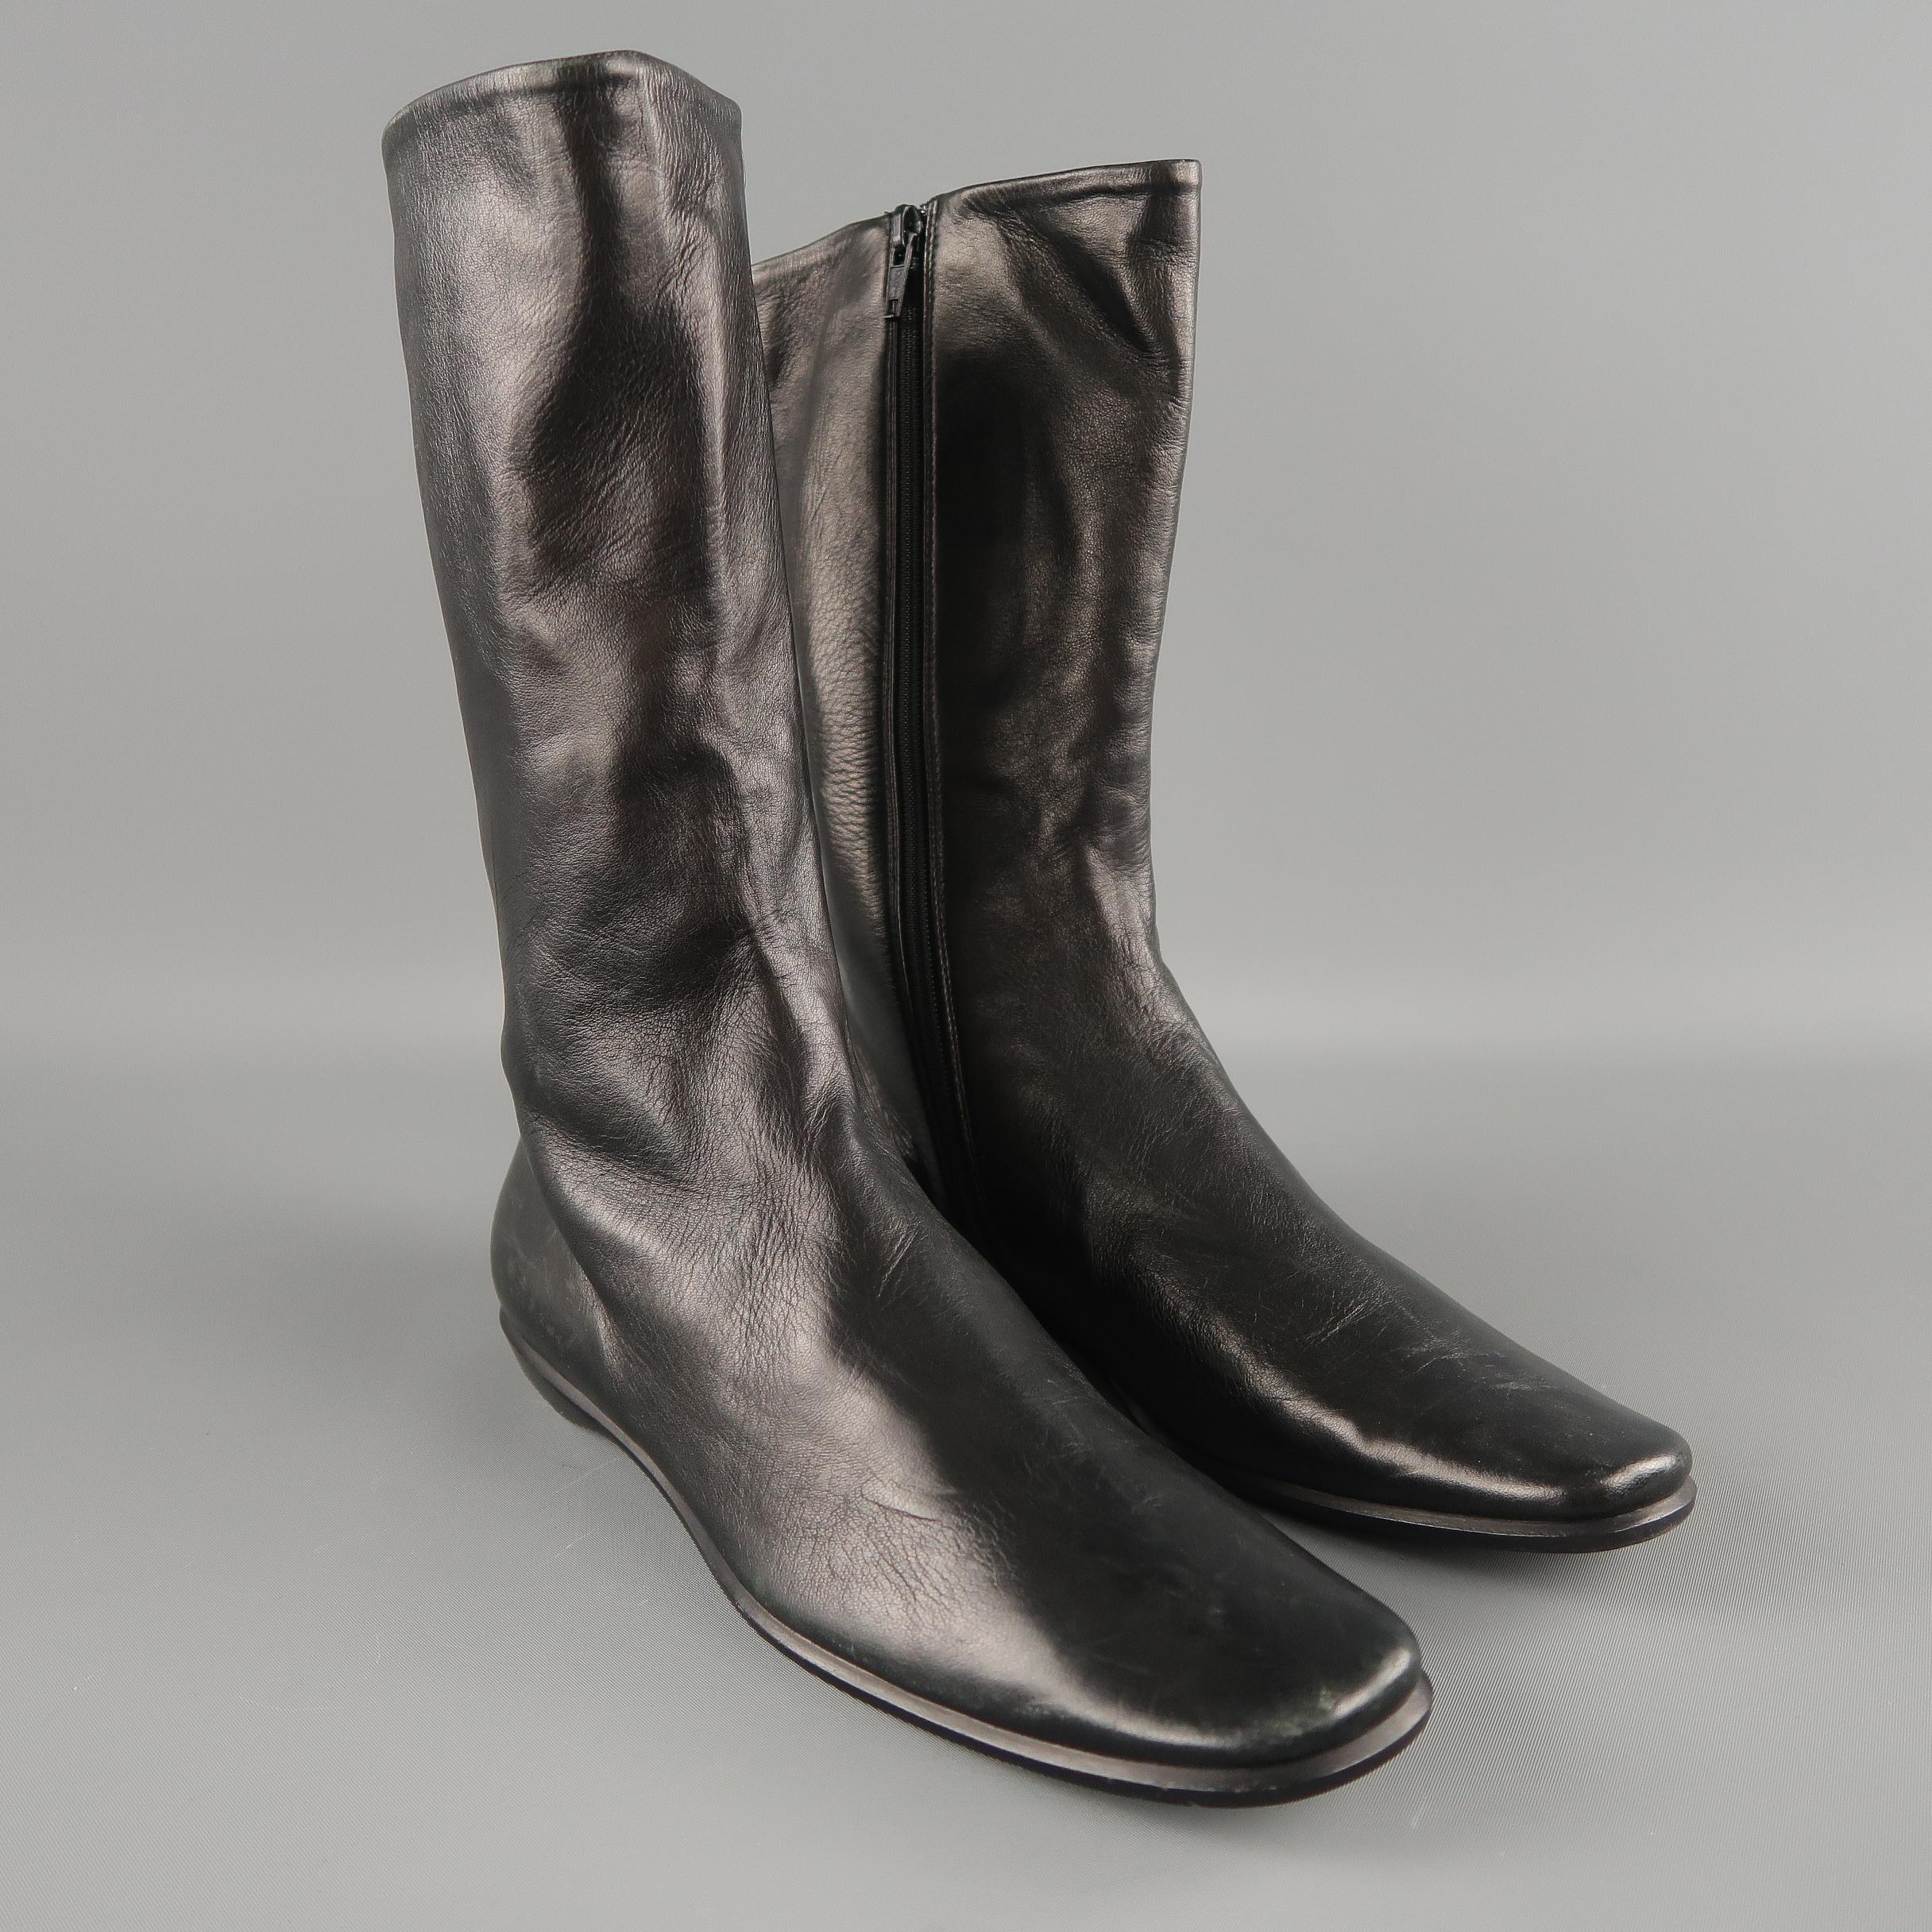 JIL SANDER boots come in smooth leather with a flat sole, calf high shaft, and squared point toe. No signs of wear. Made in Italy.
 
New without Tags. Retails: $895.00.
Marked: IT 36
 
Measurements:
 
Length: 10 in.
Width: 3 in.
Height: 10.5 in.